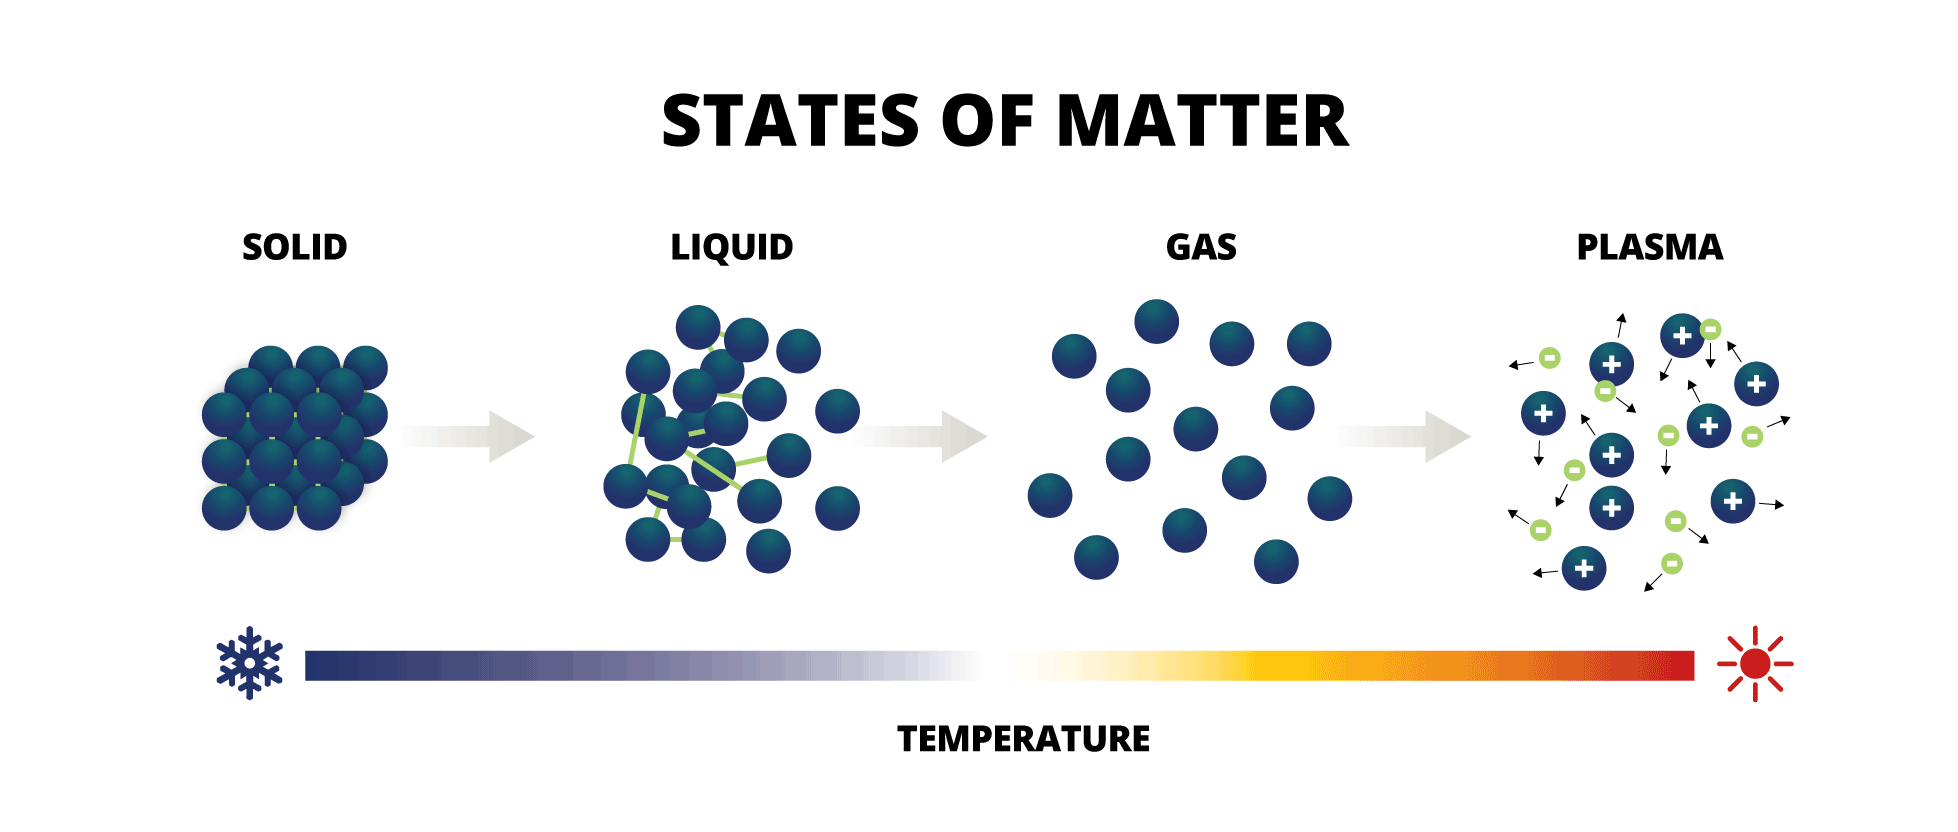 States of Matter
Solid > Liquid > Gas > Plasma

Temperature effects from cold to hot.